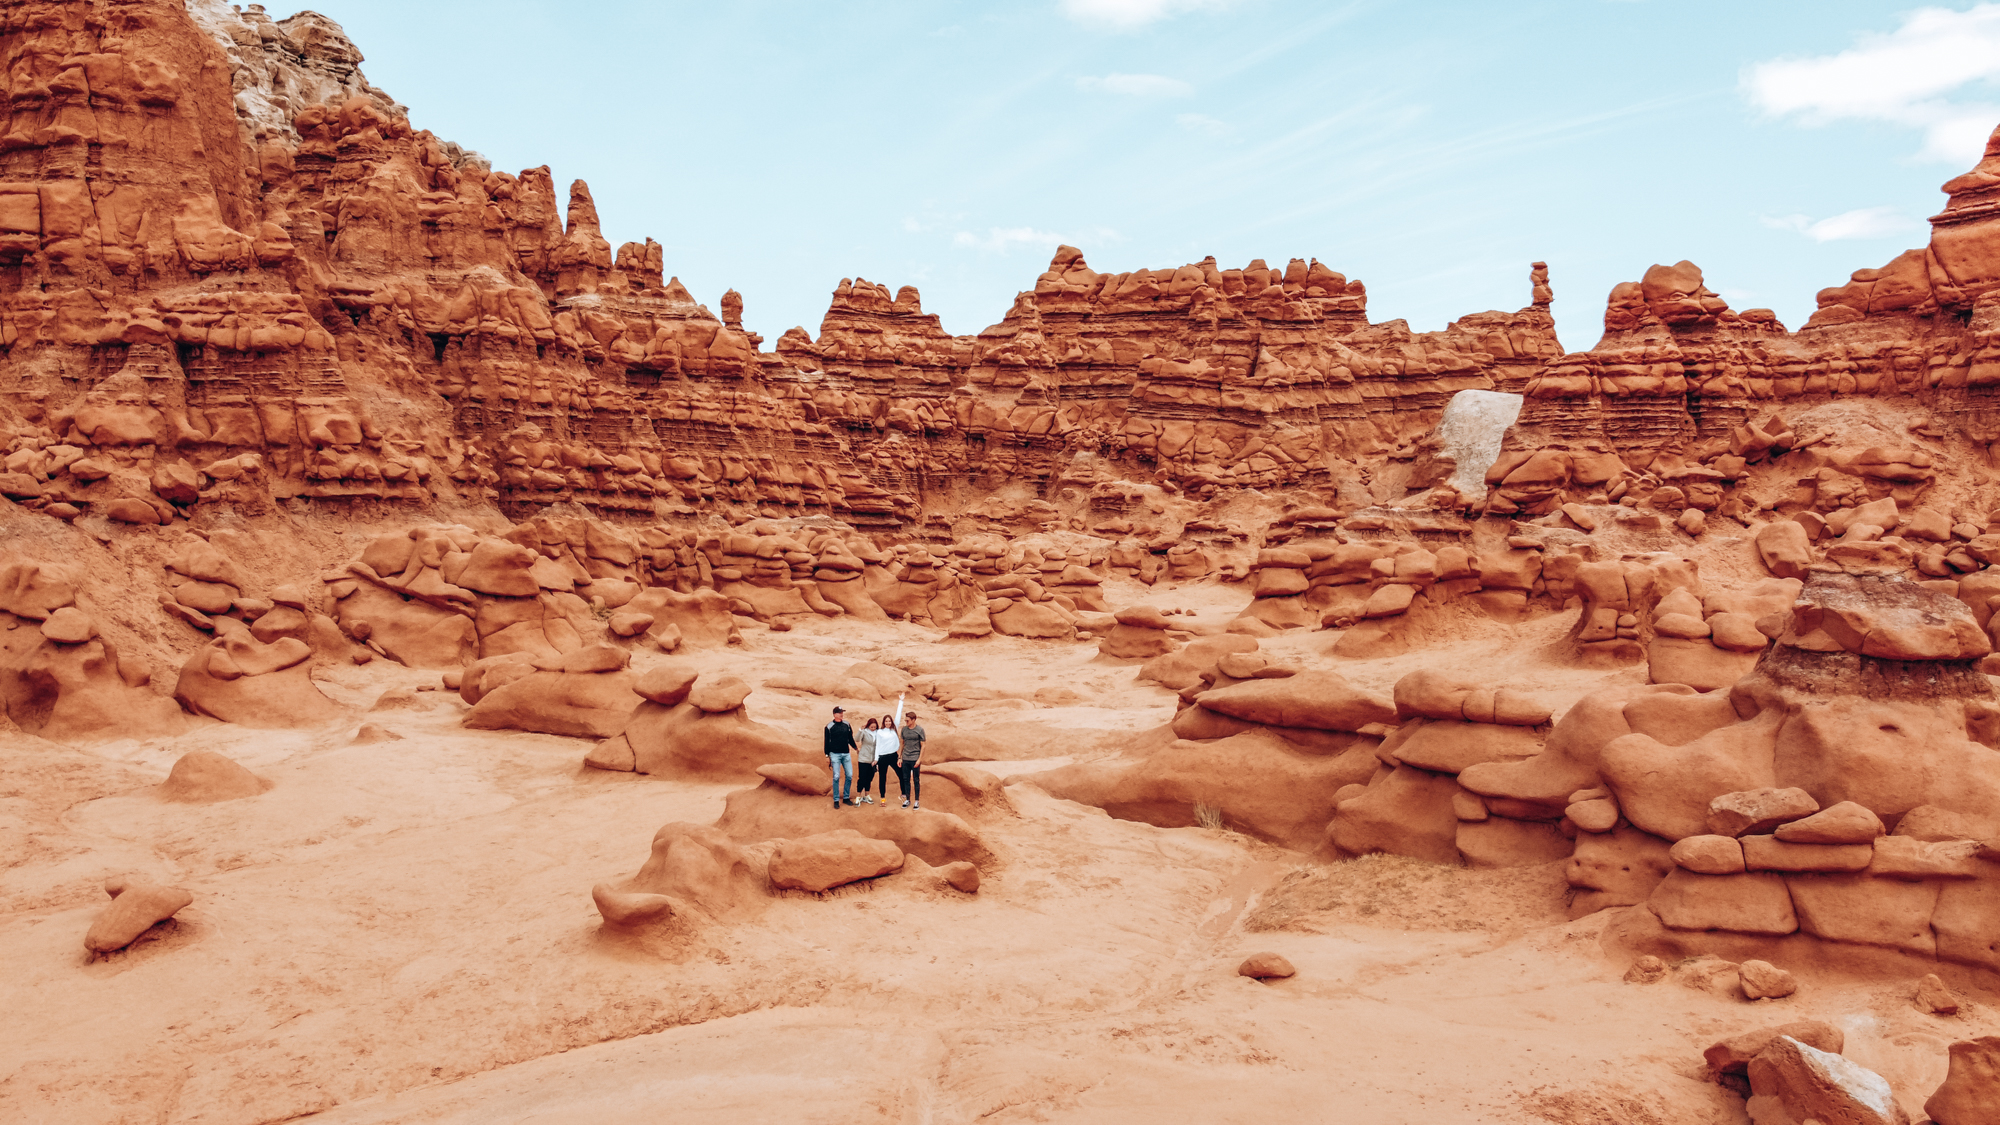 Four people can be seen in the foreground of an image with red rocks and cliffs!